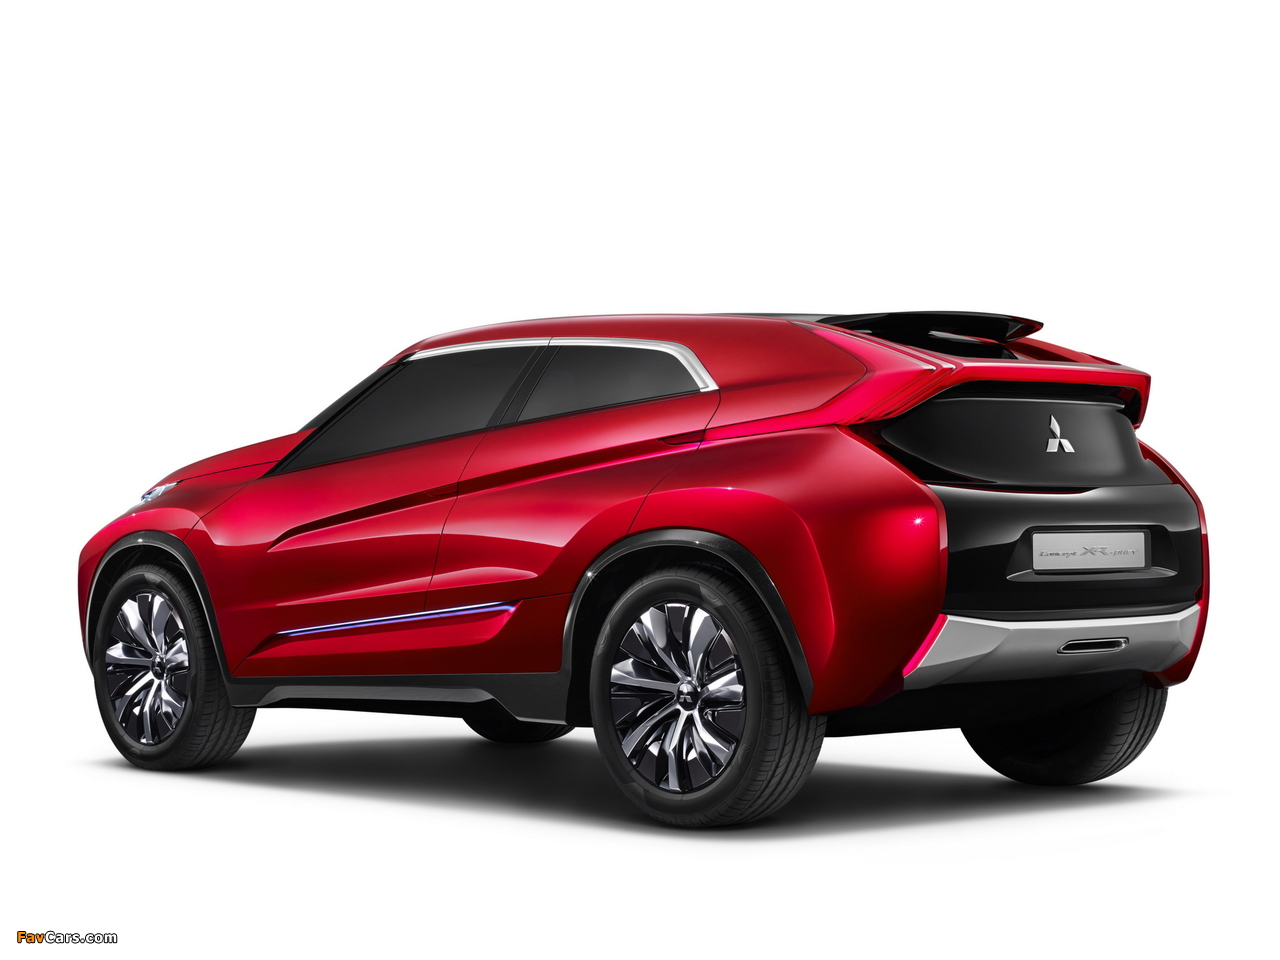 Mitsubishi Concept XR-PHEV 2013 pictures (1280 x 960)